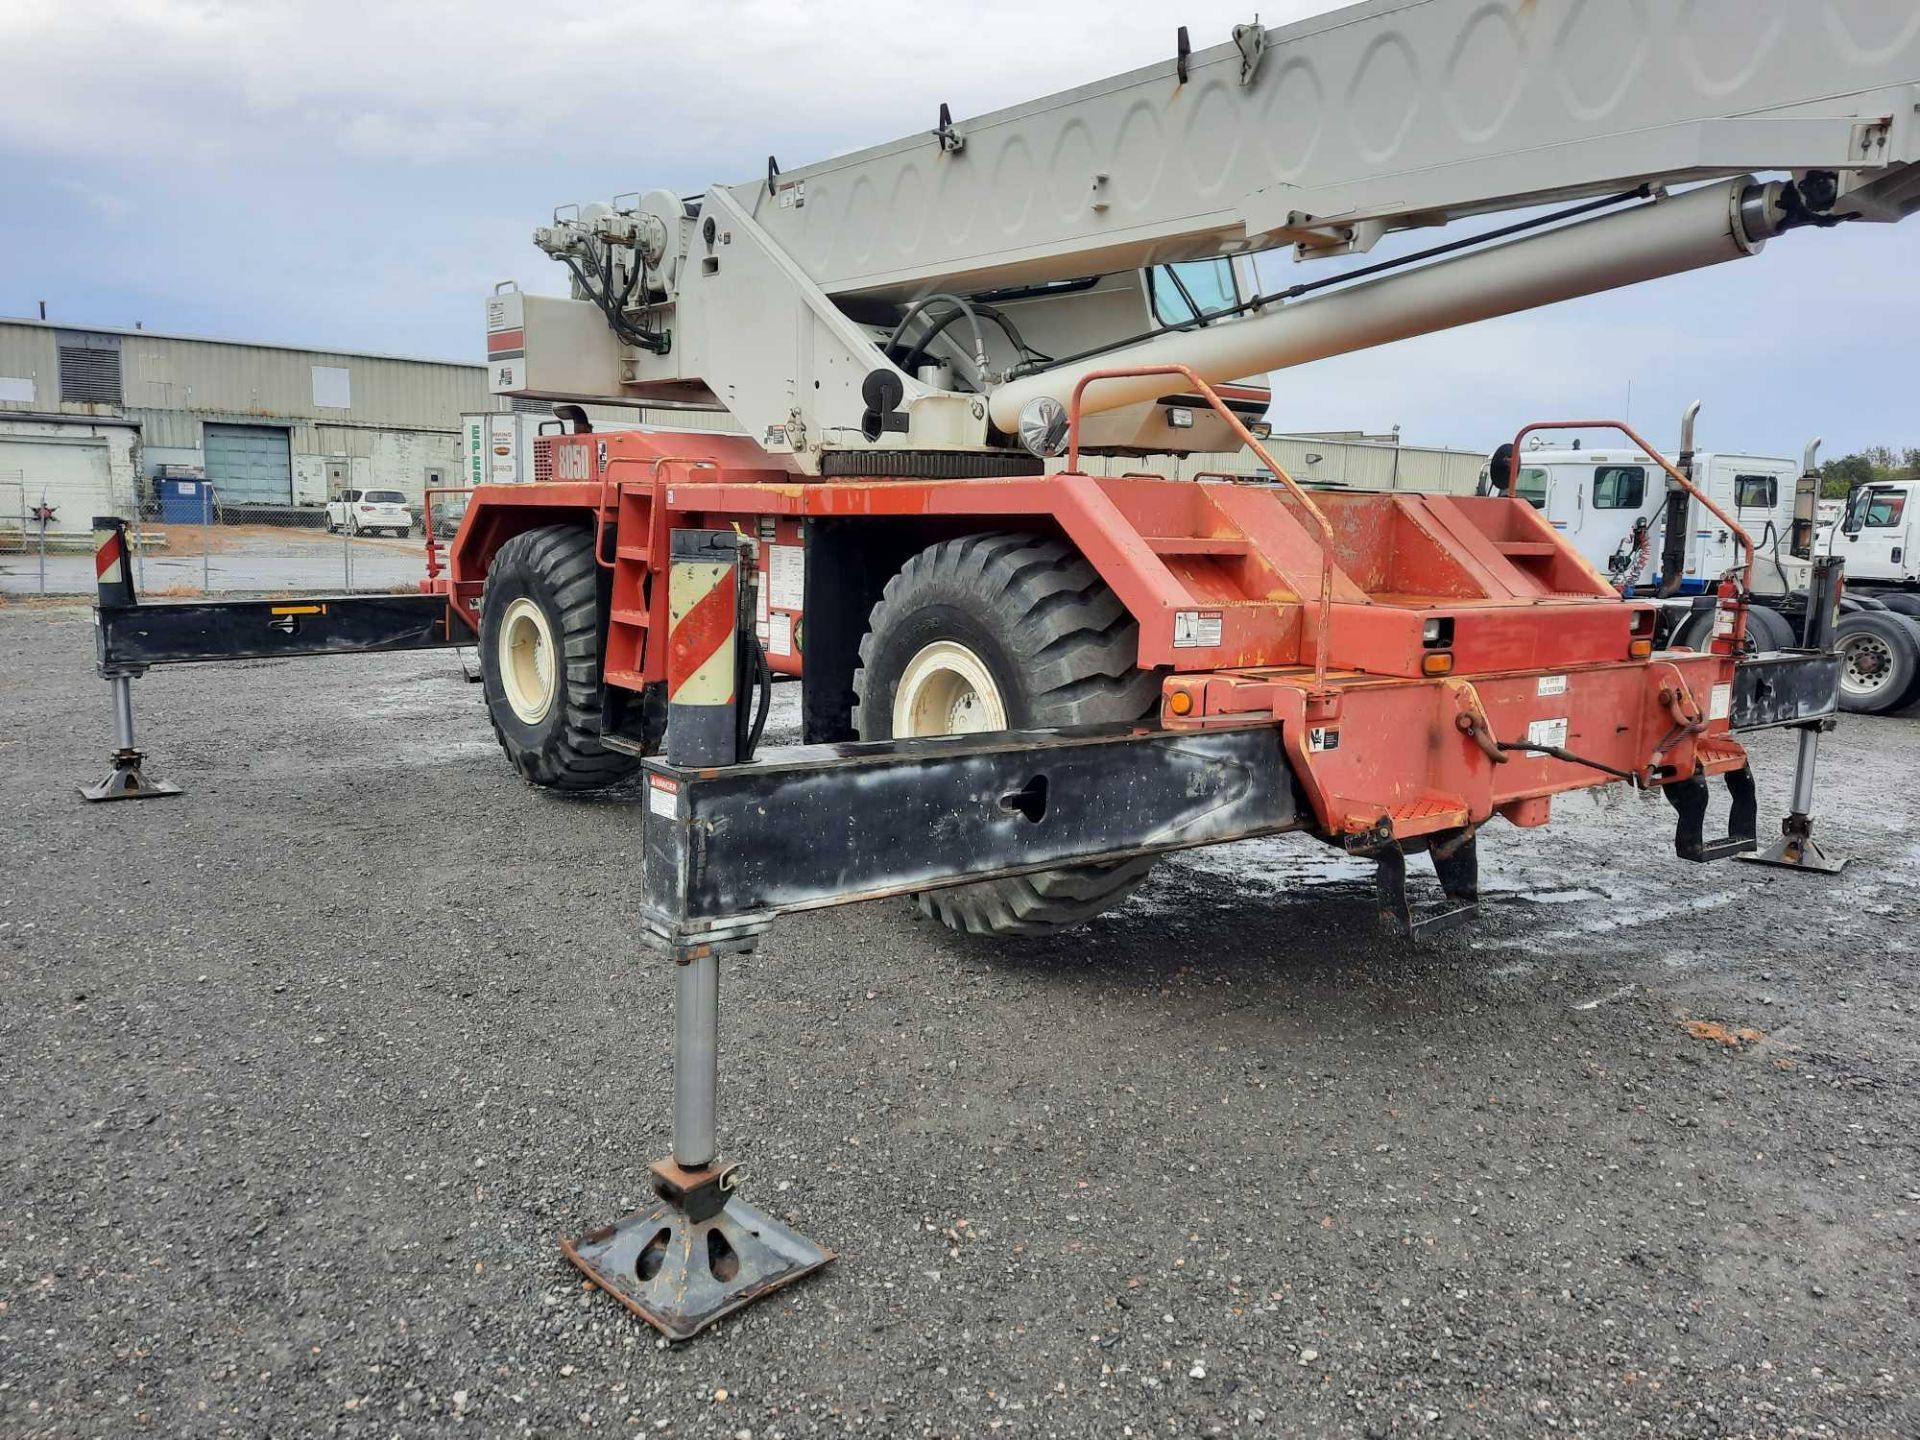 (SUBJECT TO OWNER CONFIRMATION) 2007 Link-Belt RTC8050 Series II Rough Terrain Crane - Image 9 of 78